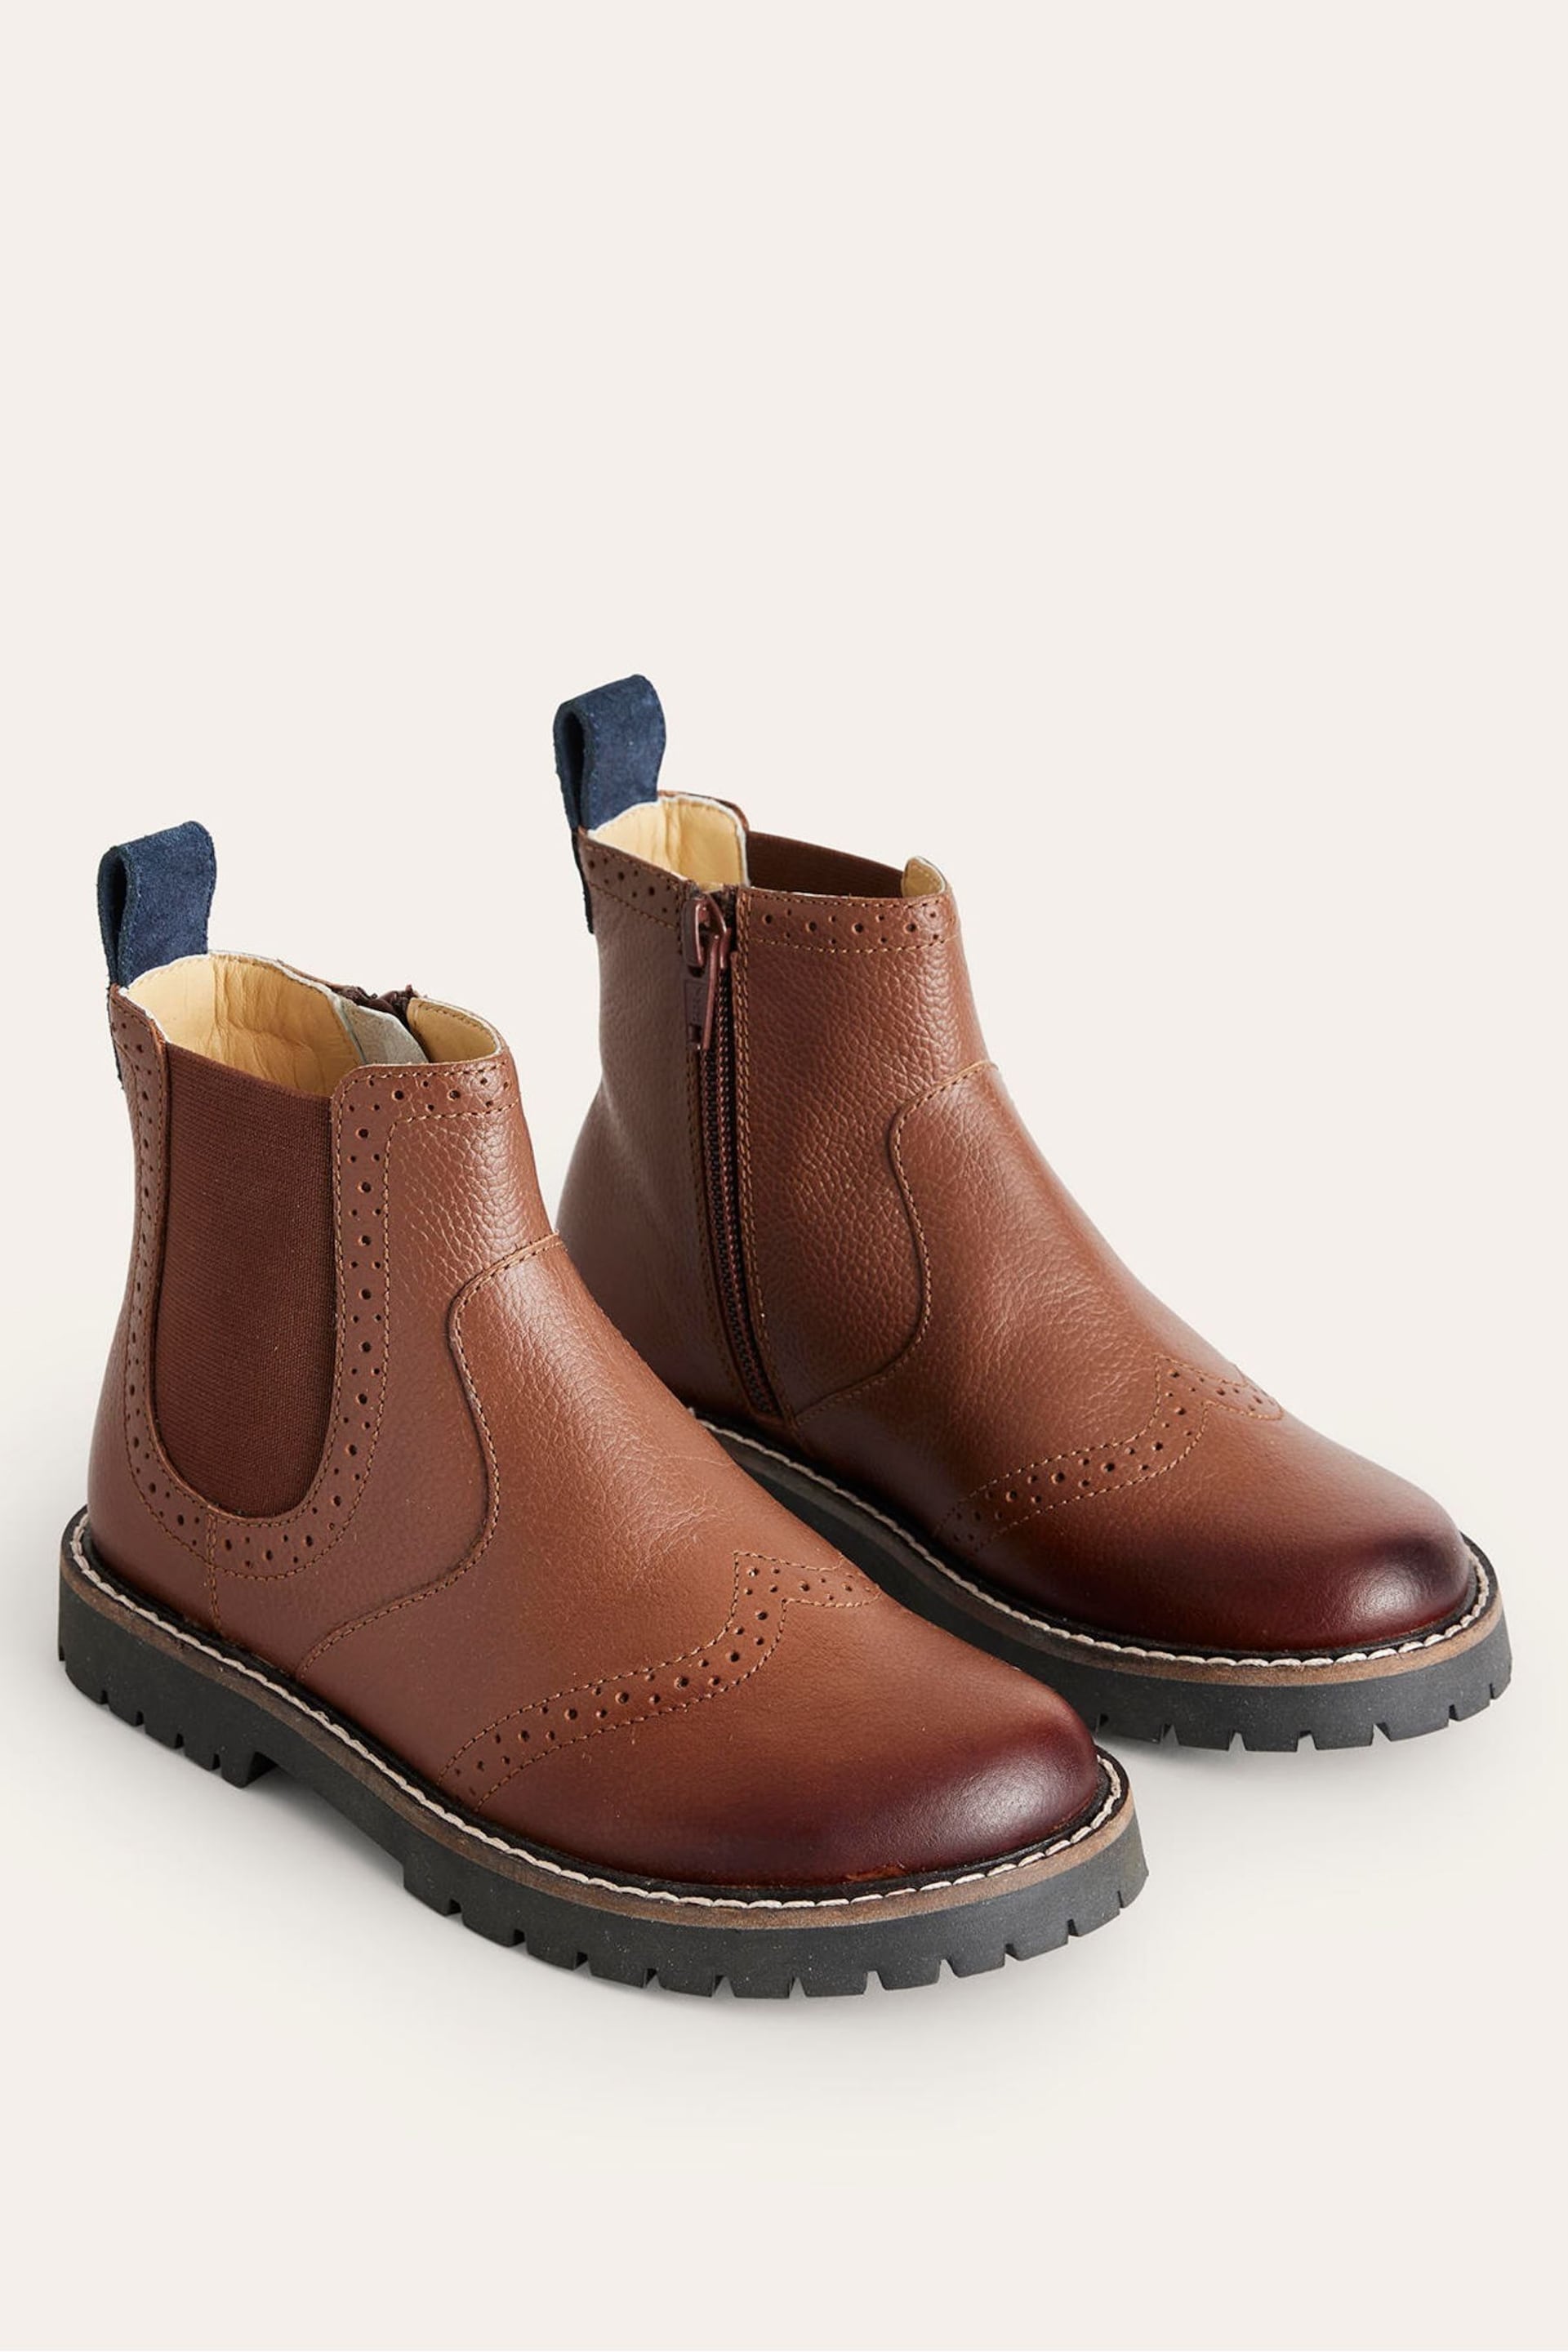 Boden Brown Chelsea Boots - Image 1 of 3